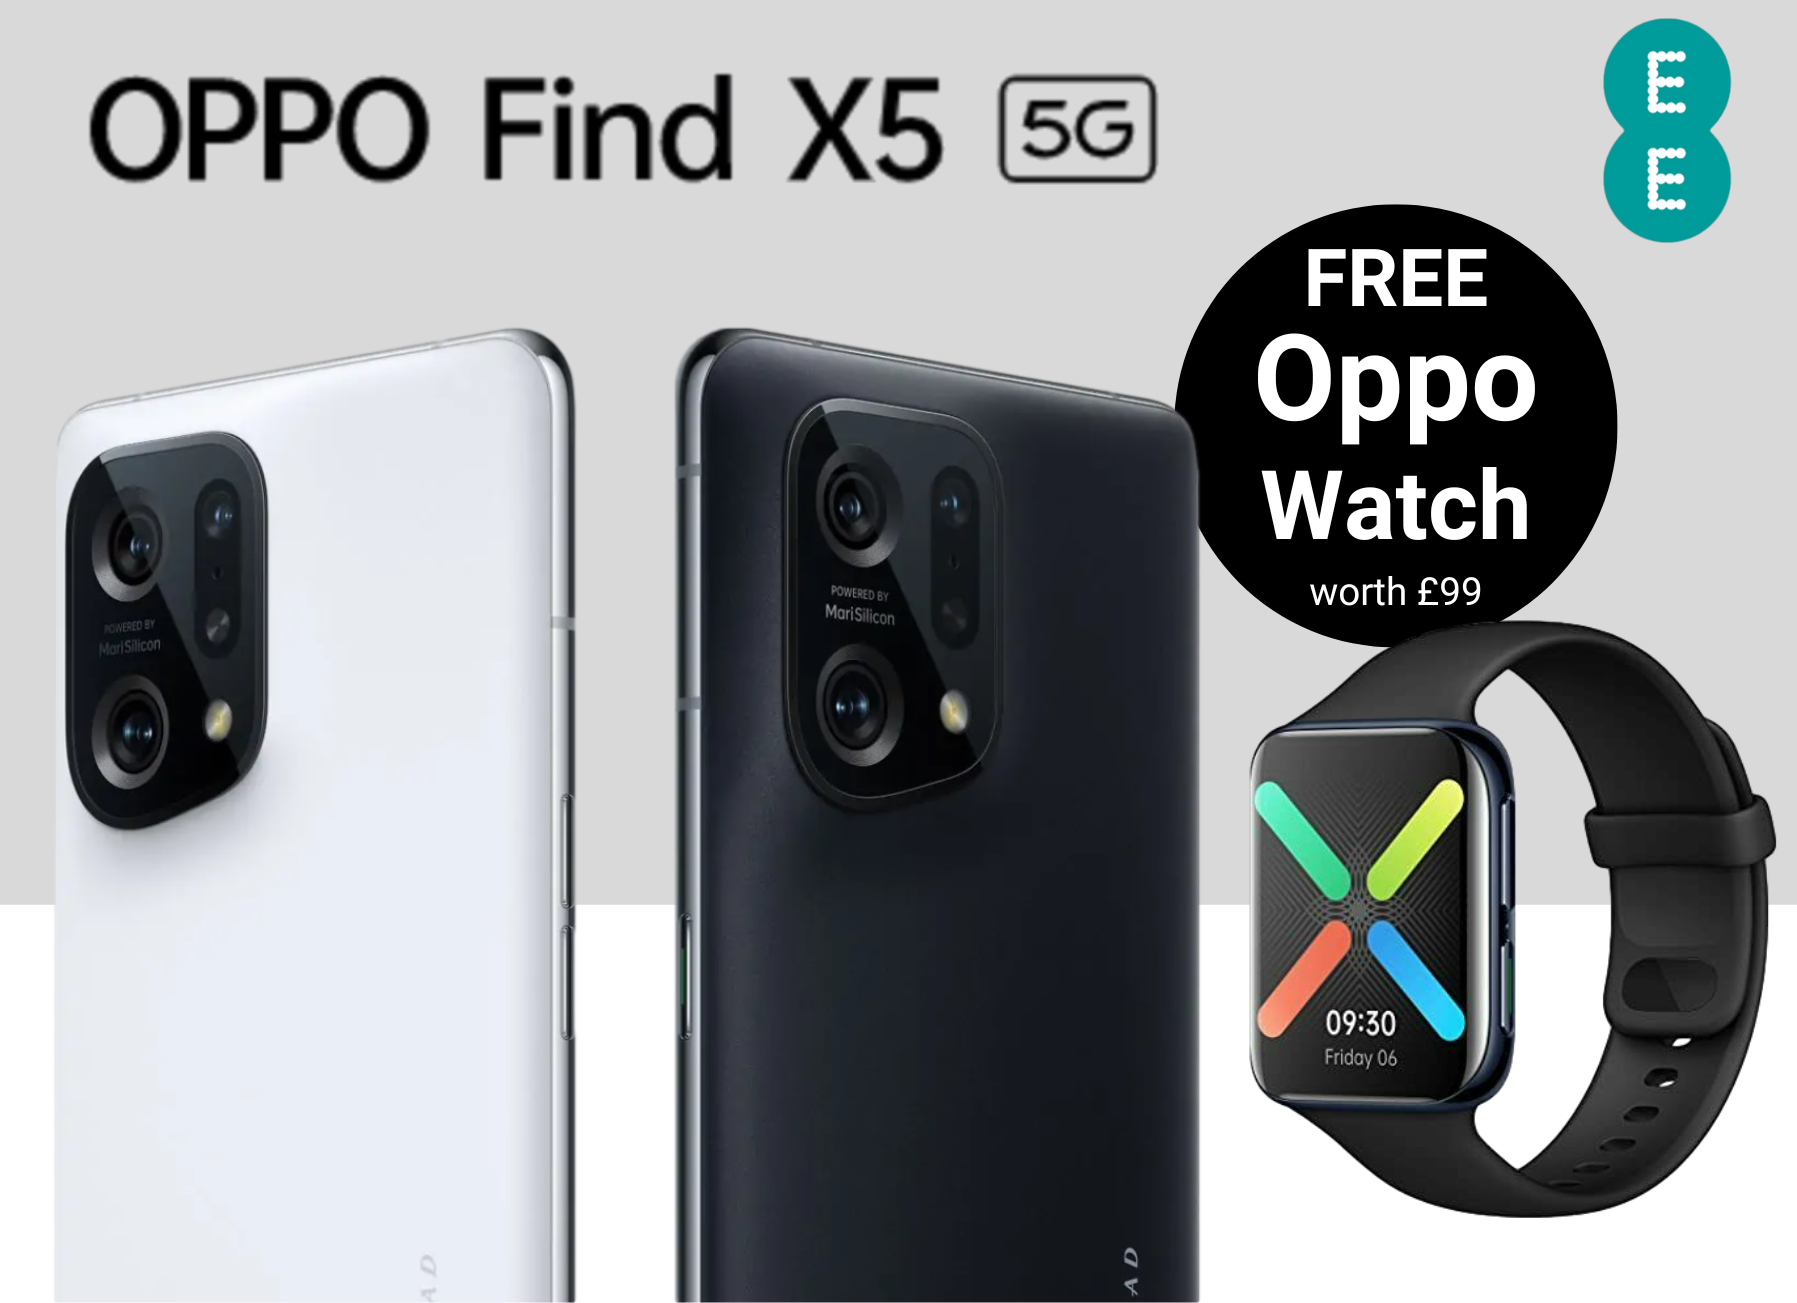 Free Oppo Watch with Find X5 Deals on EE